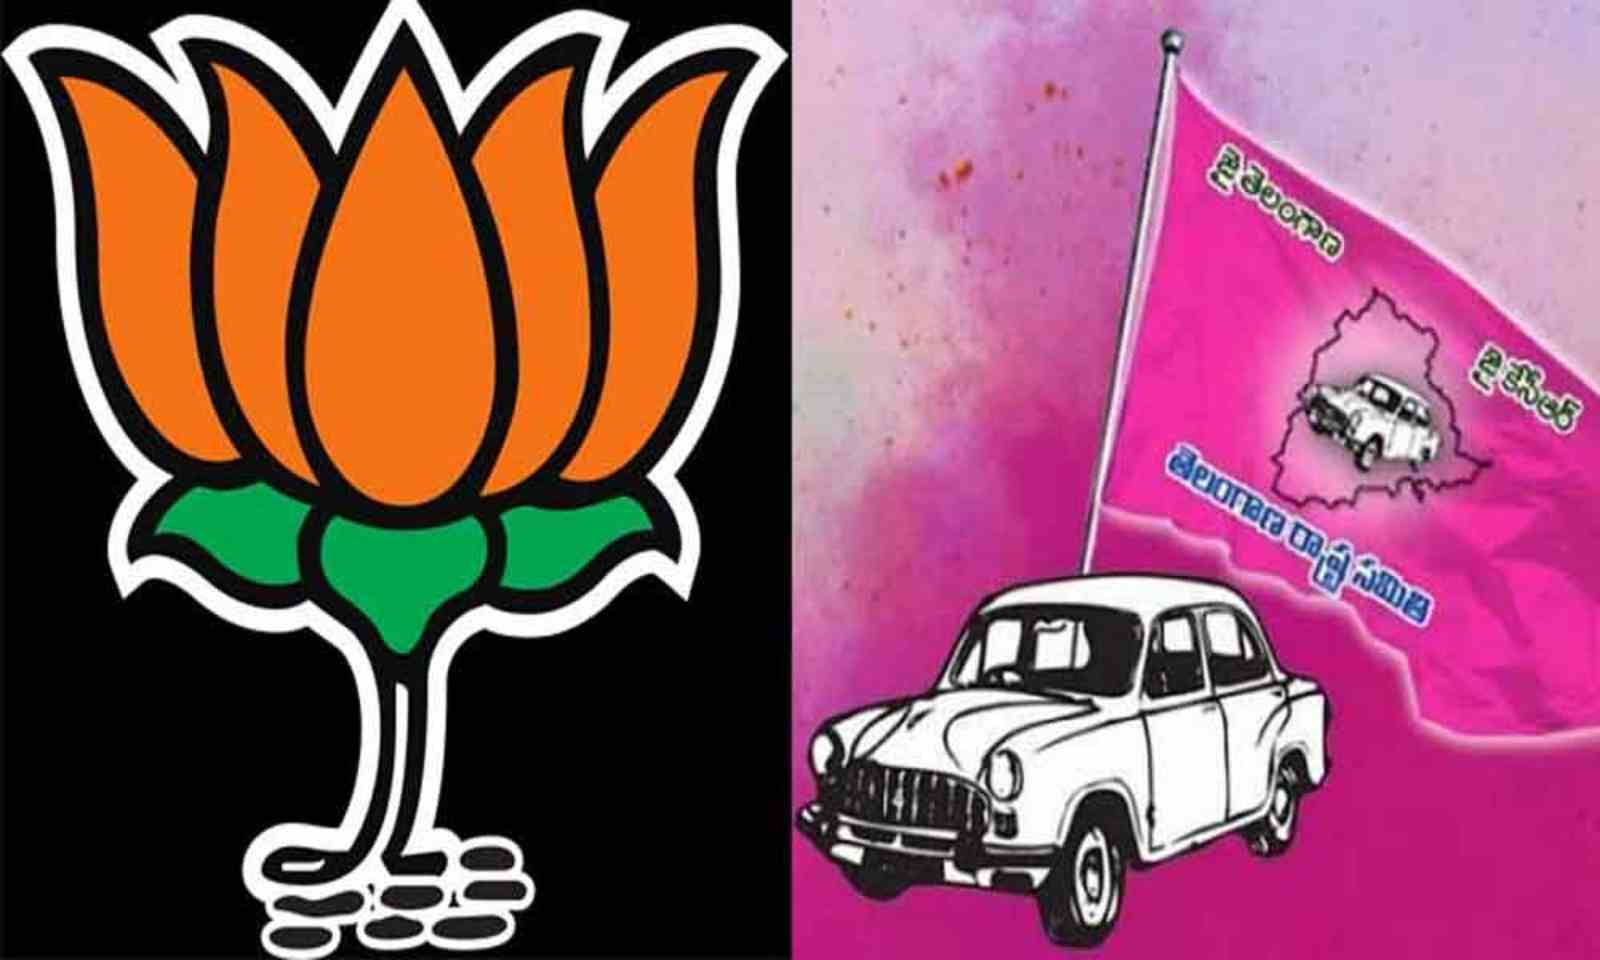 BJP is looking to encourage immigrants from trs party